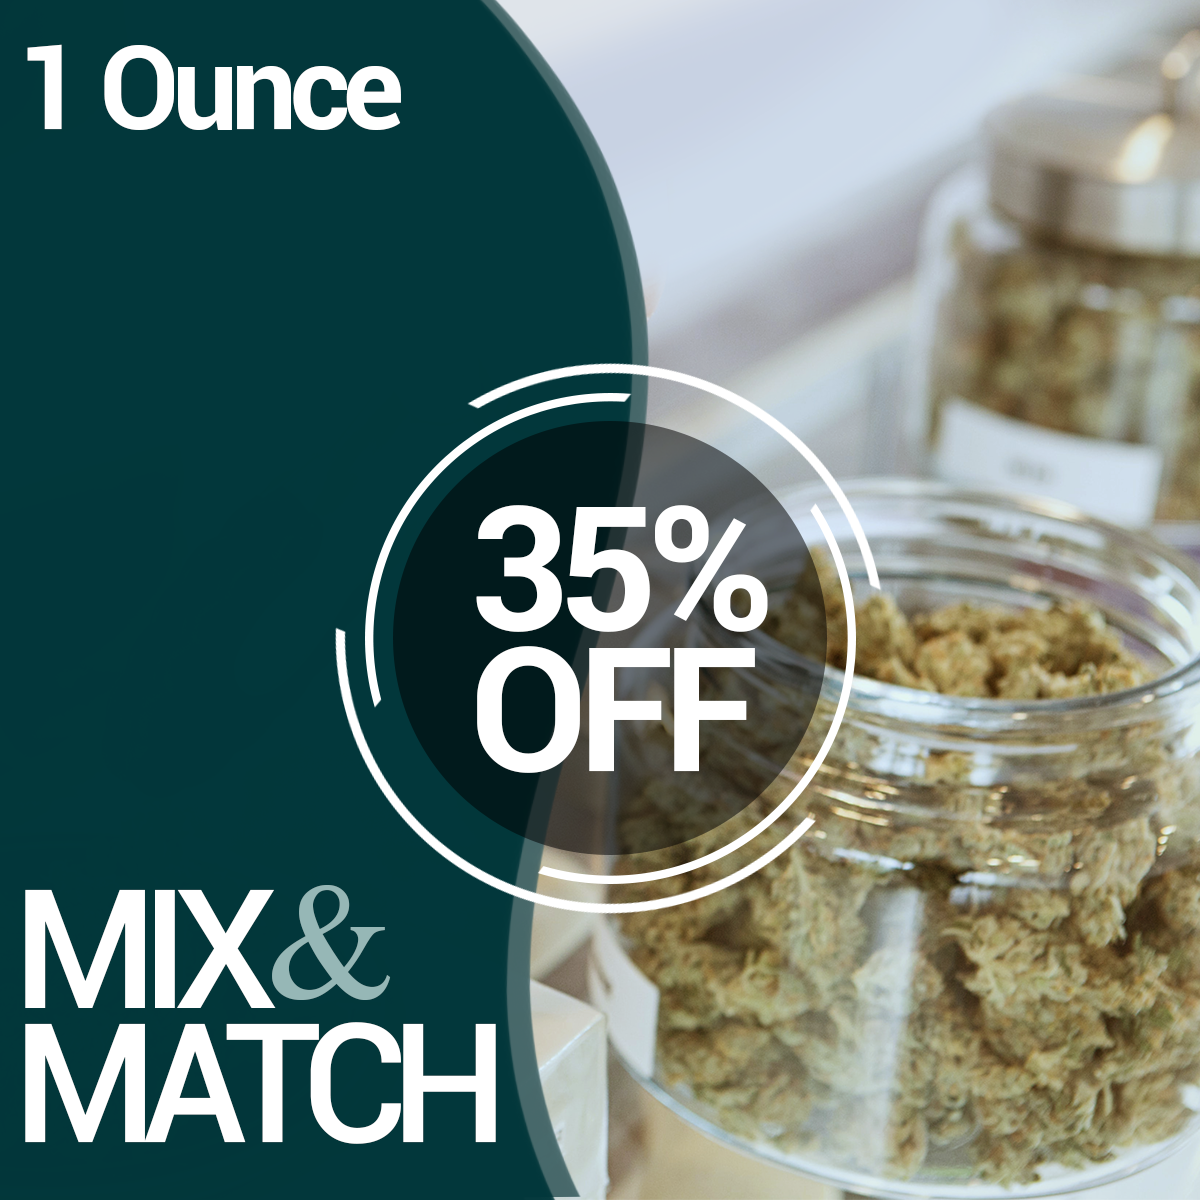 1 Ounce Cannabis - Mix and Match